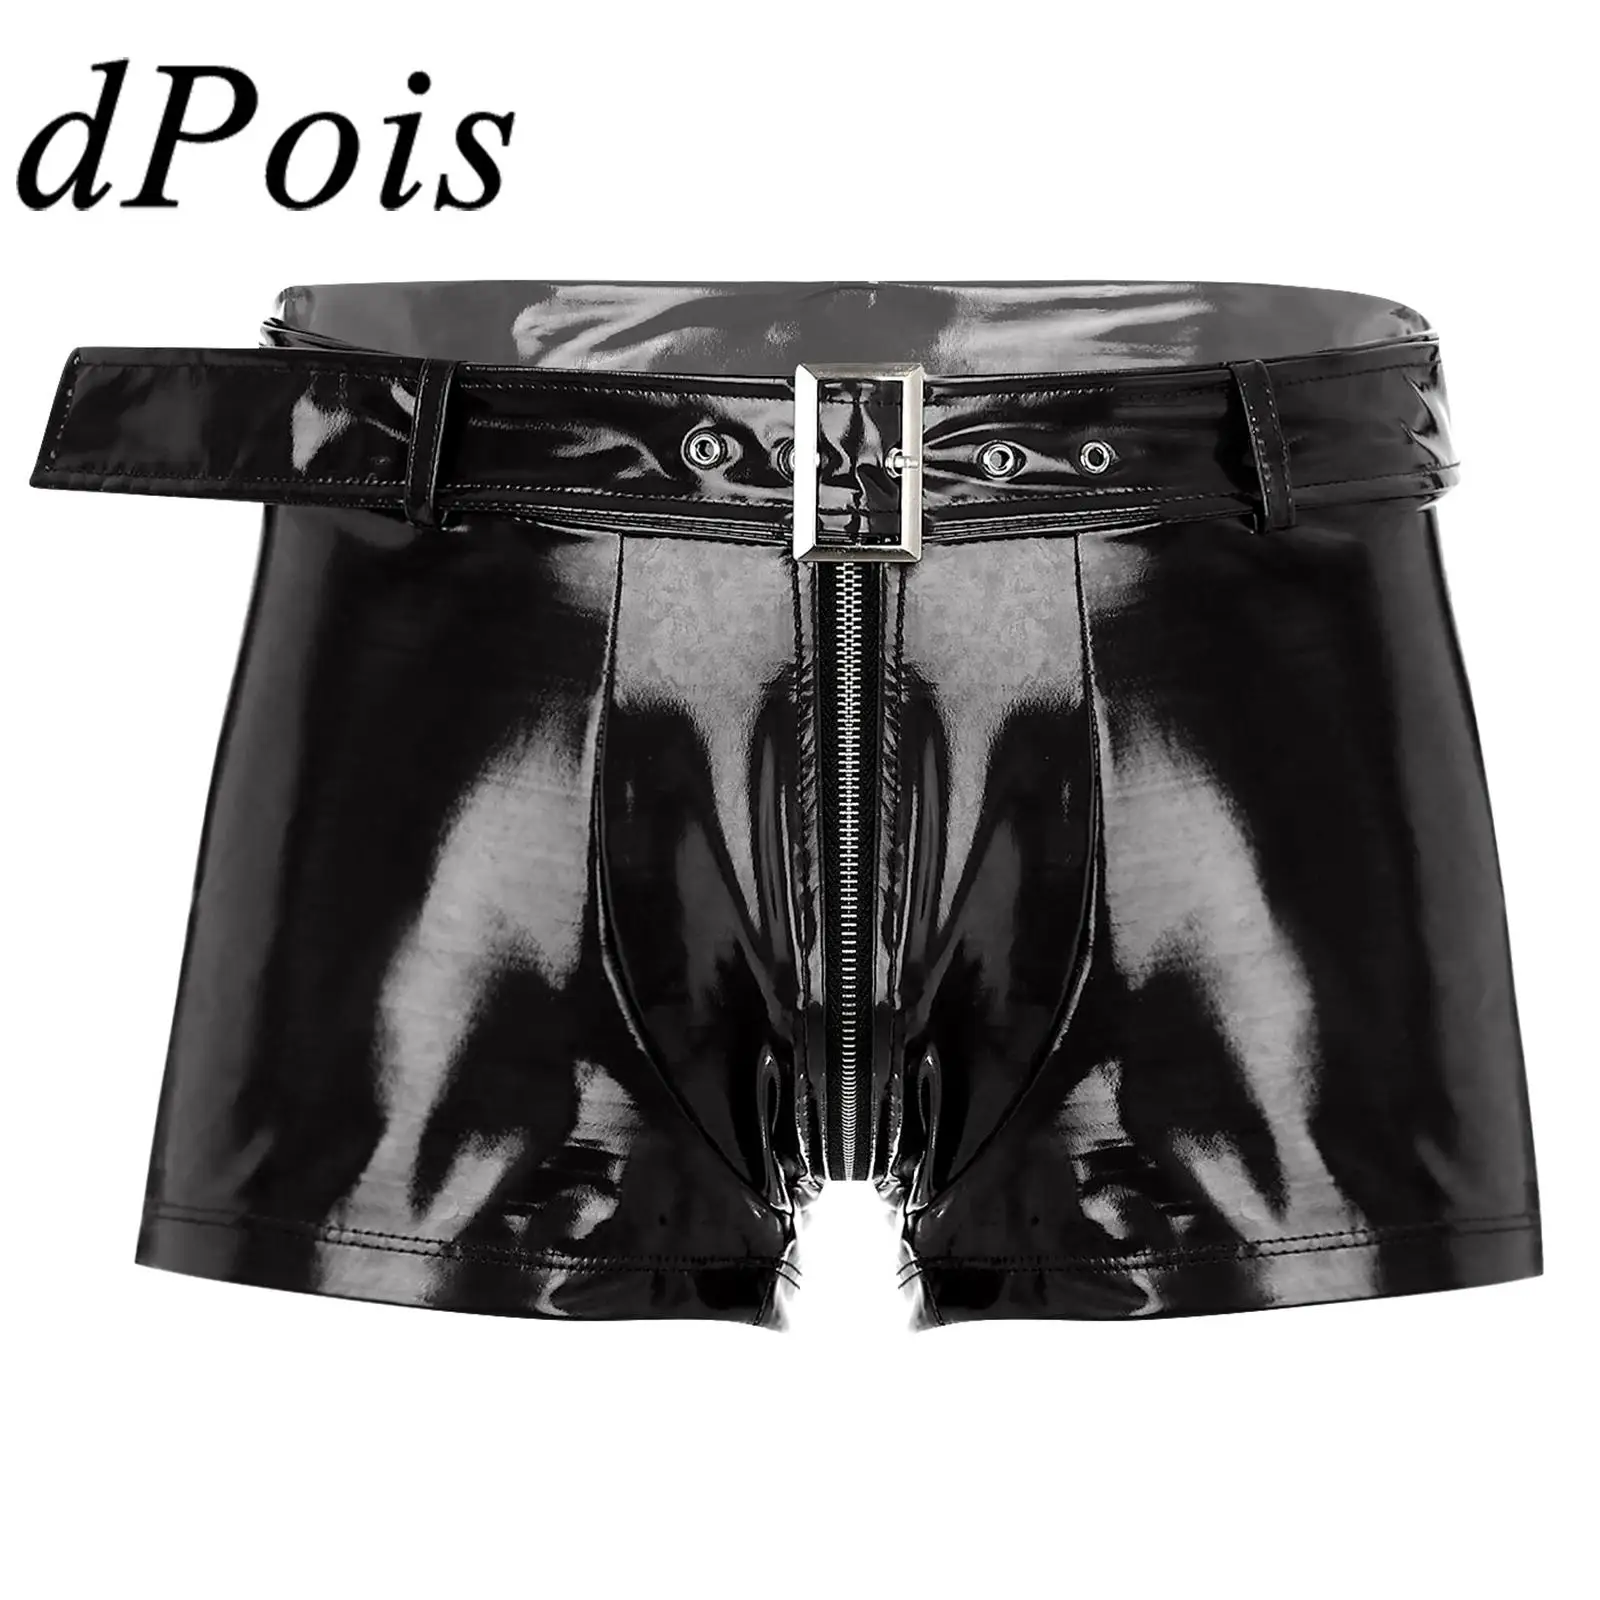 

Mens Wet Look Boxer Shorts Hot Pants Zipper Openable Cortch Bulge Pouch Shorts for Bar Disco Costume Nightclub Sexy Nightwear